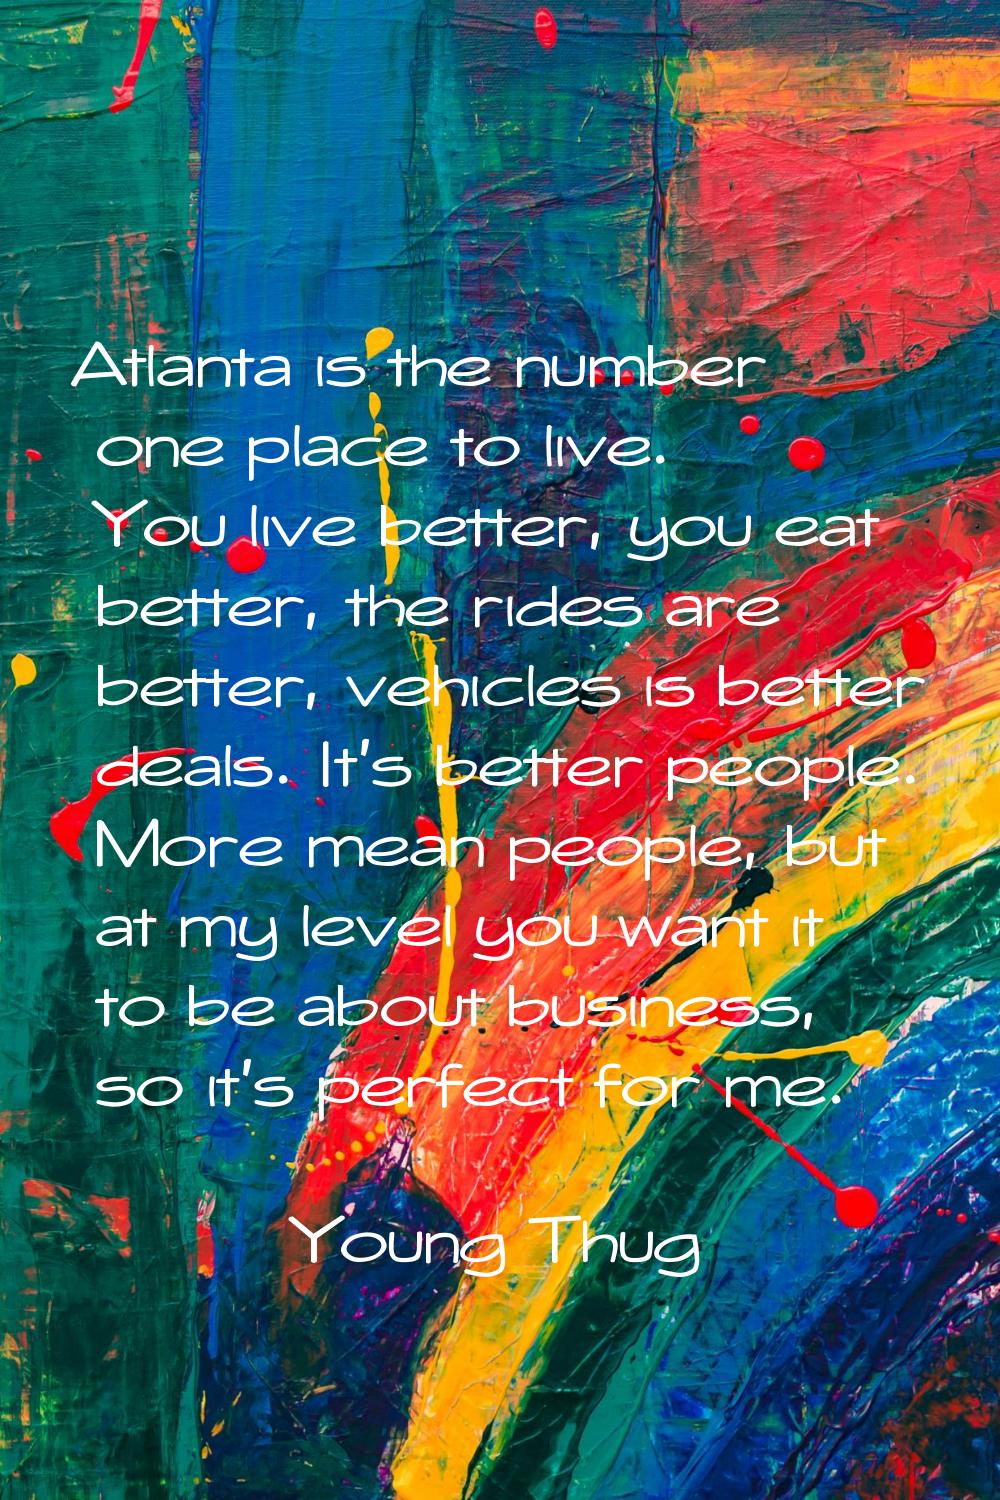 Atlanta is the number one place to live. You live better, you eat better, the rides are better, veh